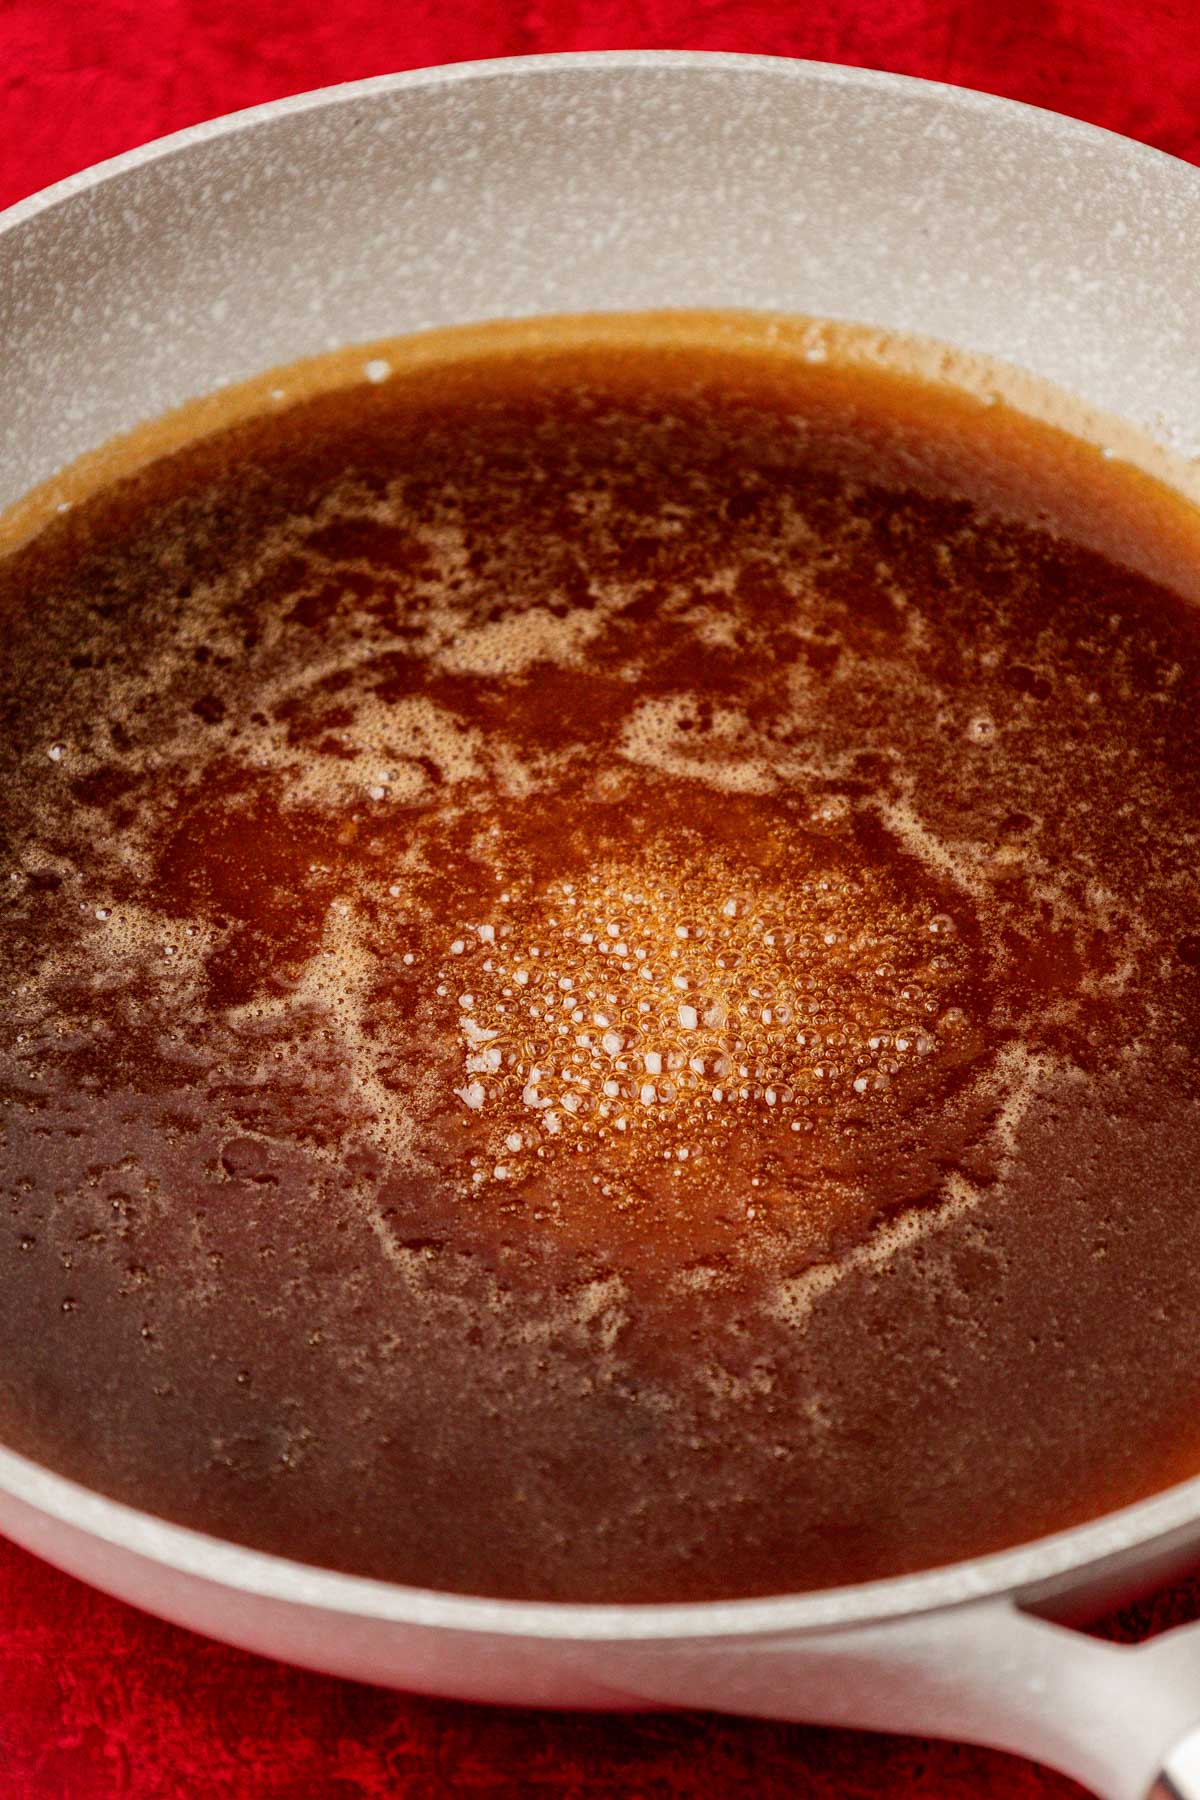 Sugar and water simmering in a skillet.